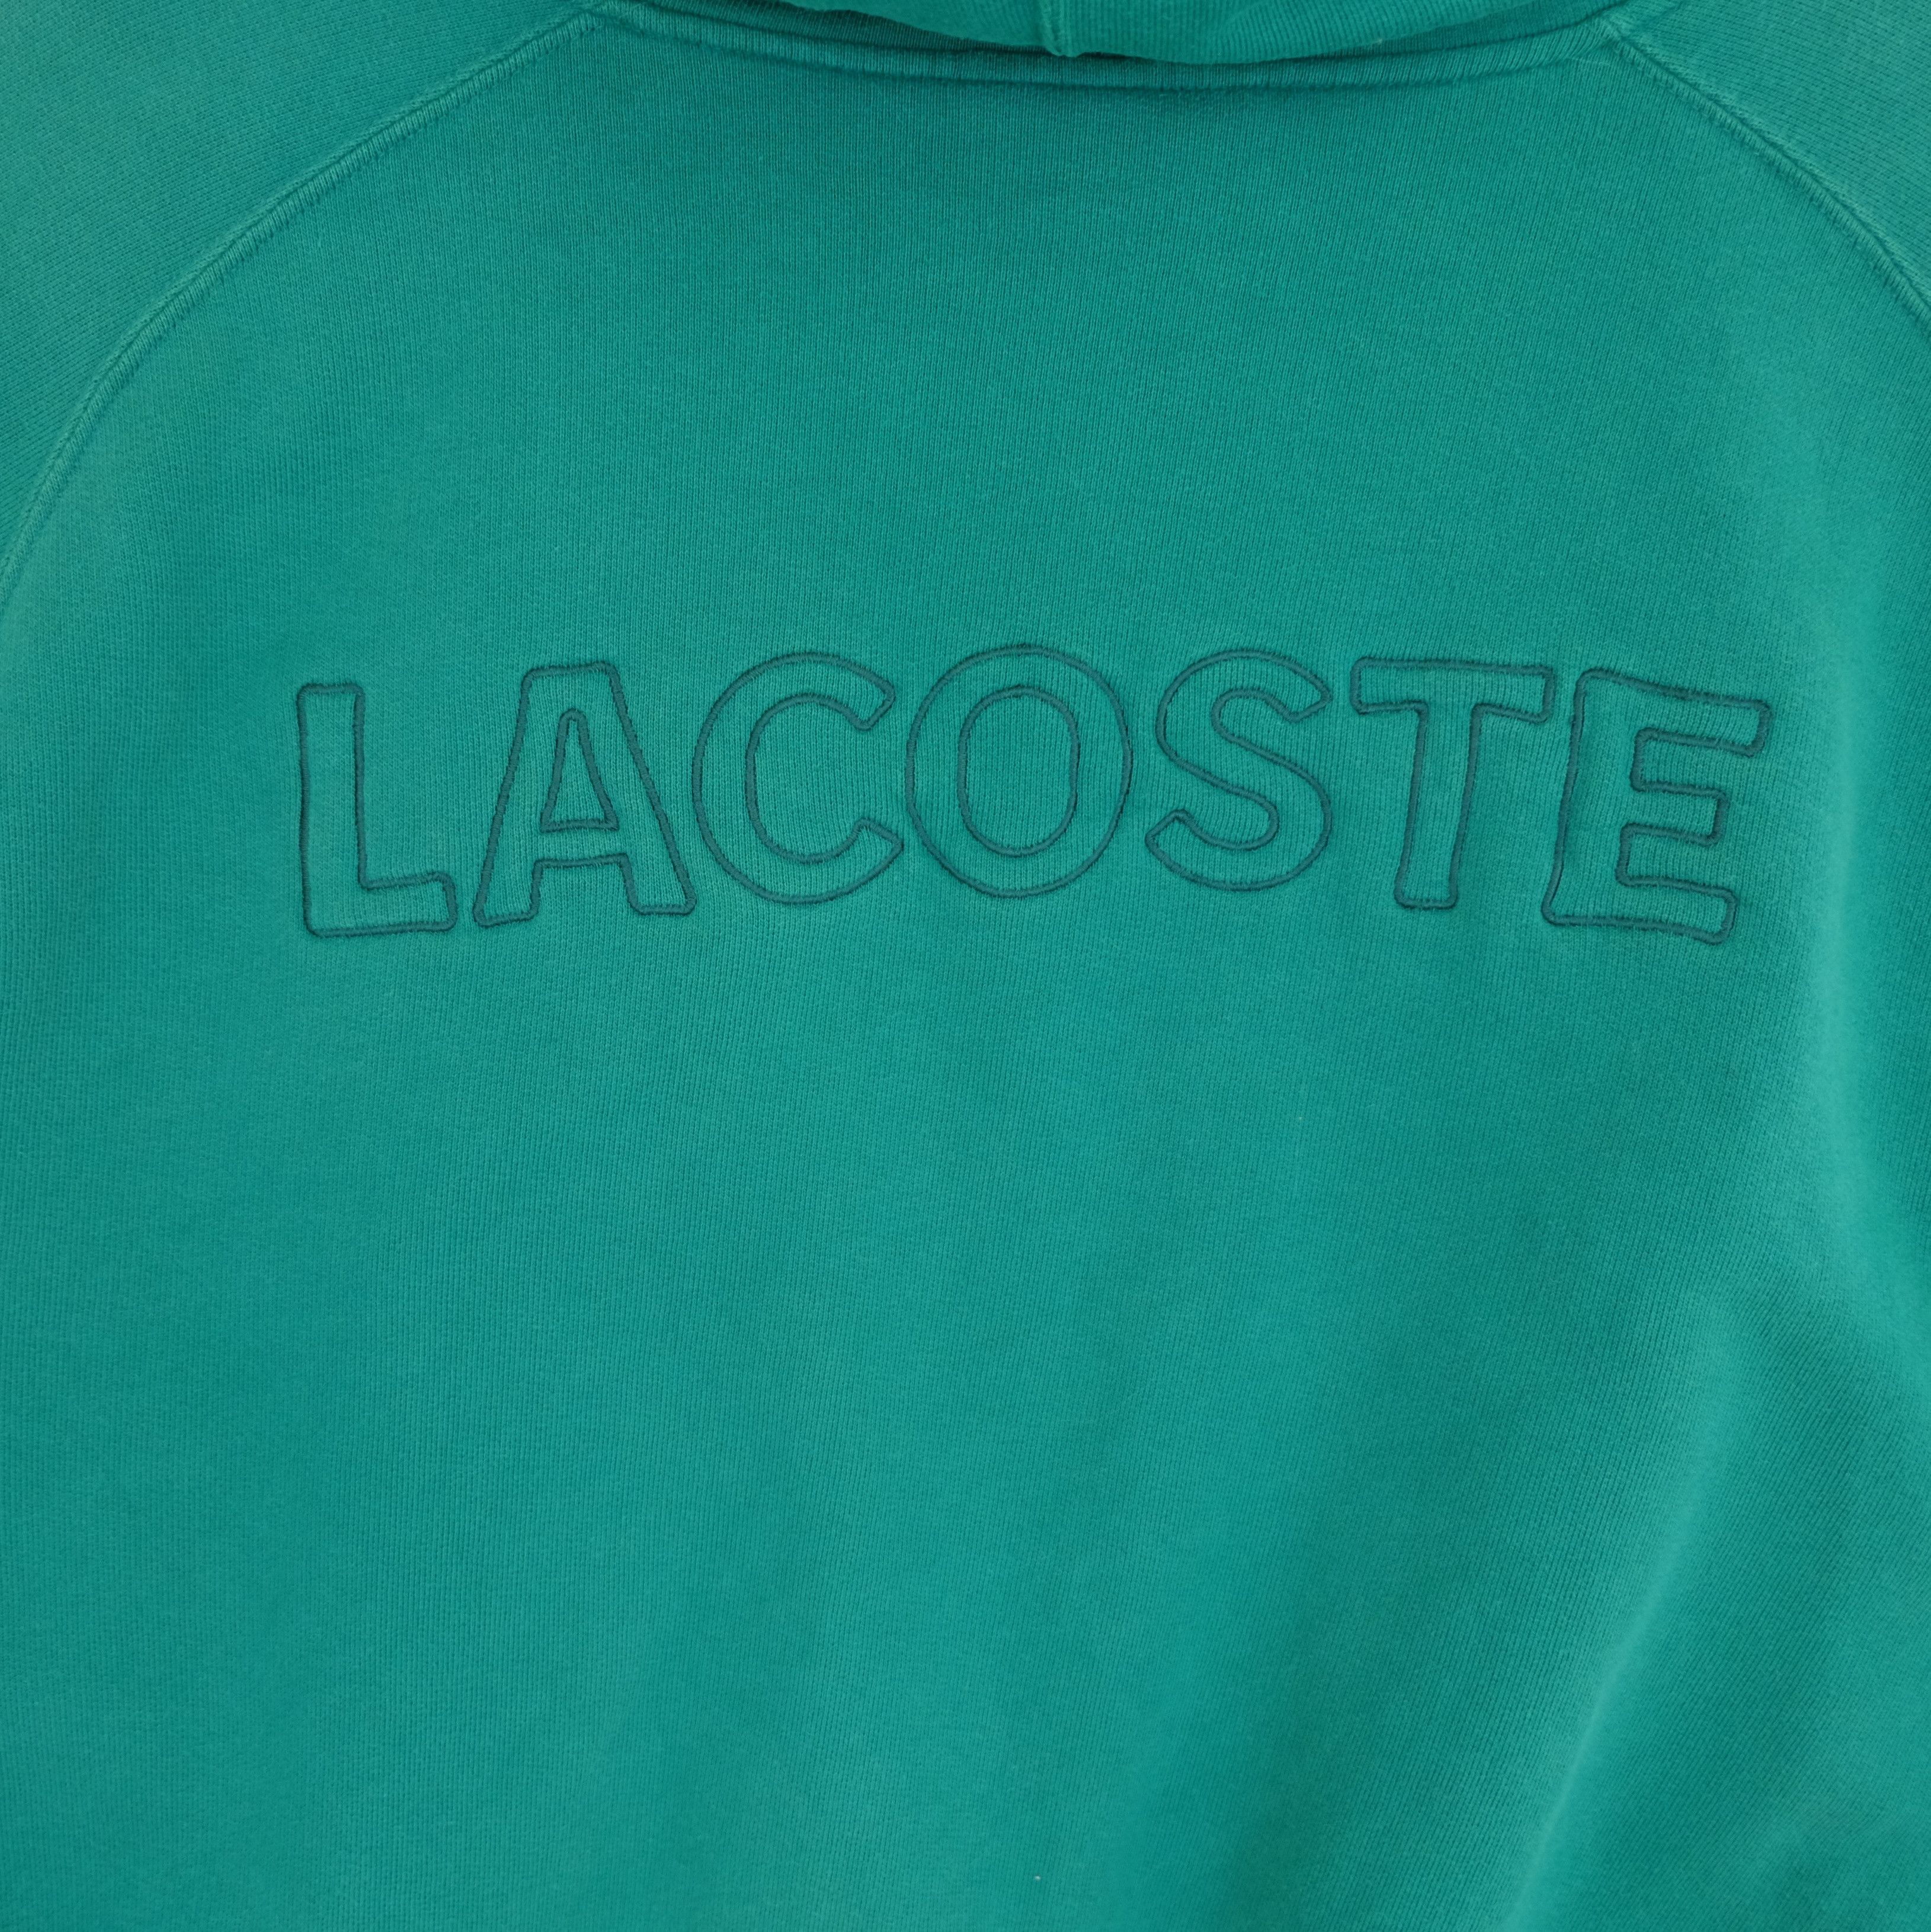 Lacoste LACOSTE Big Spell Out Logo Hoodie Size XL / US 12-14 / IT 48-50 - 9 Preview